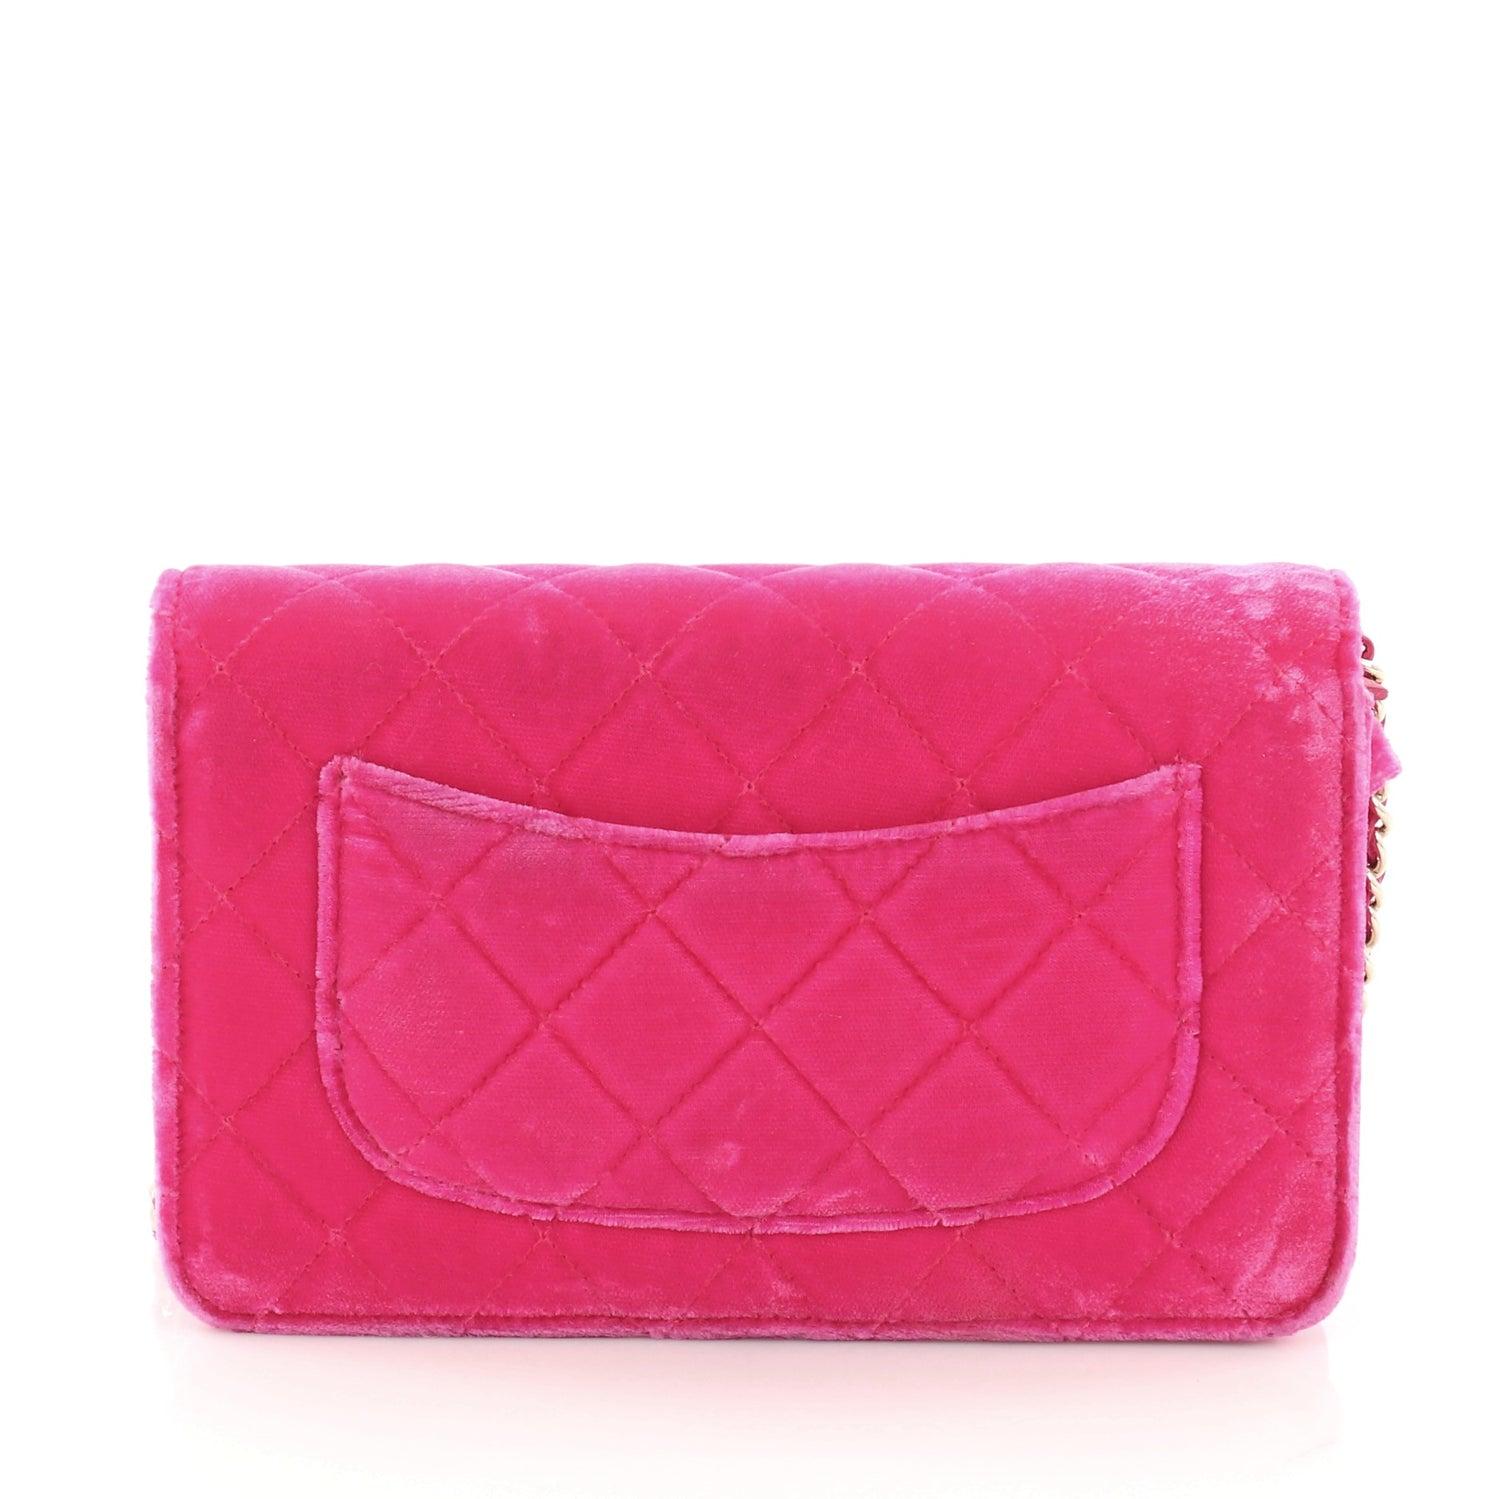 Chanel 2014 Velvet Neon Pink Wallet on Chain WOC Crossbody Flap Bag In Good Condition For Sale In Miami, FL